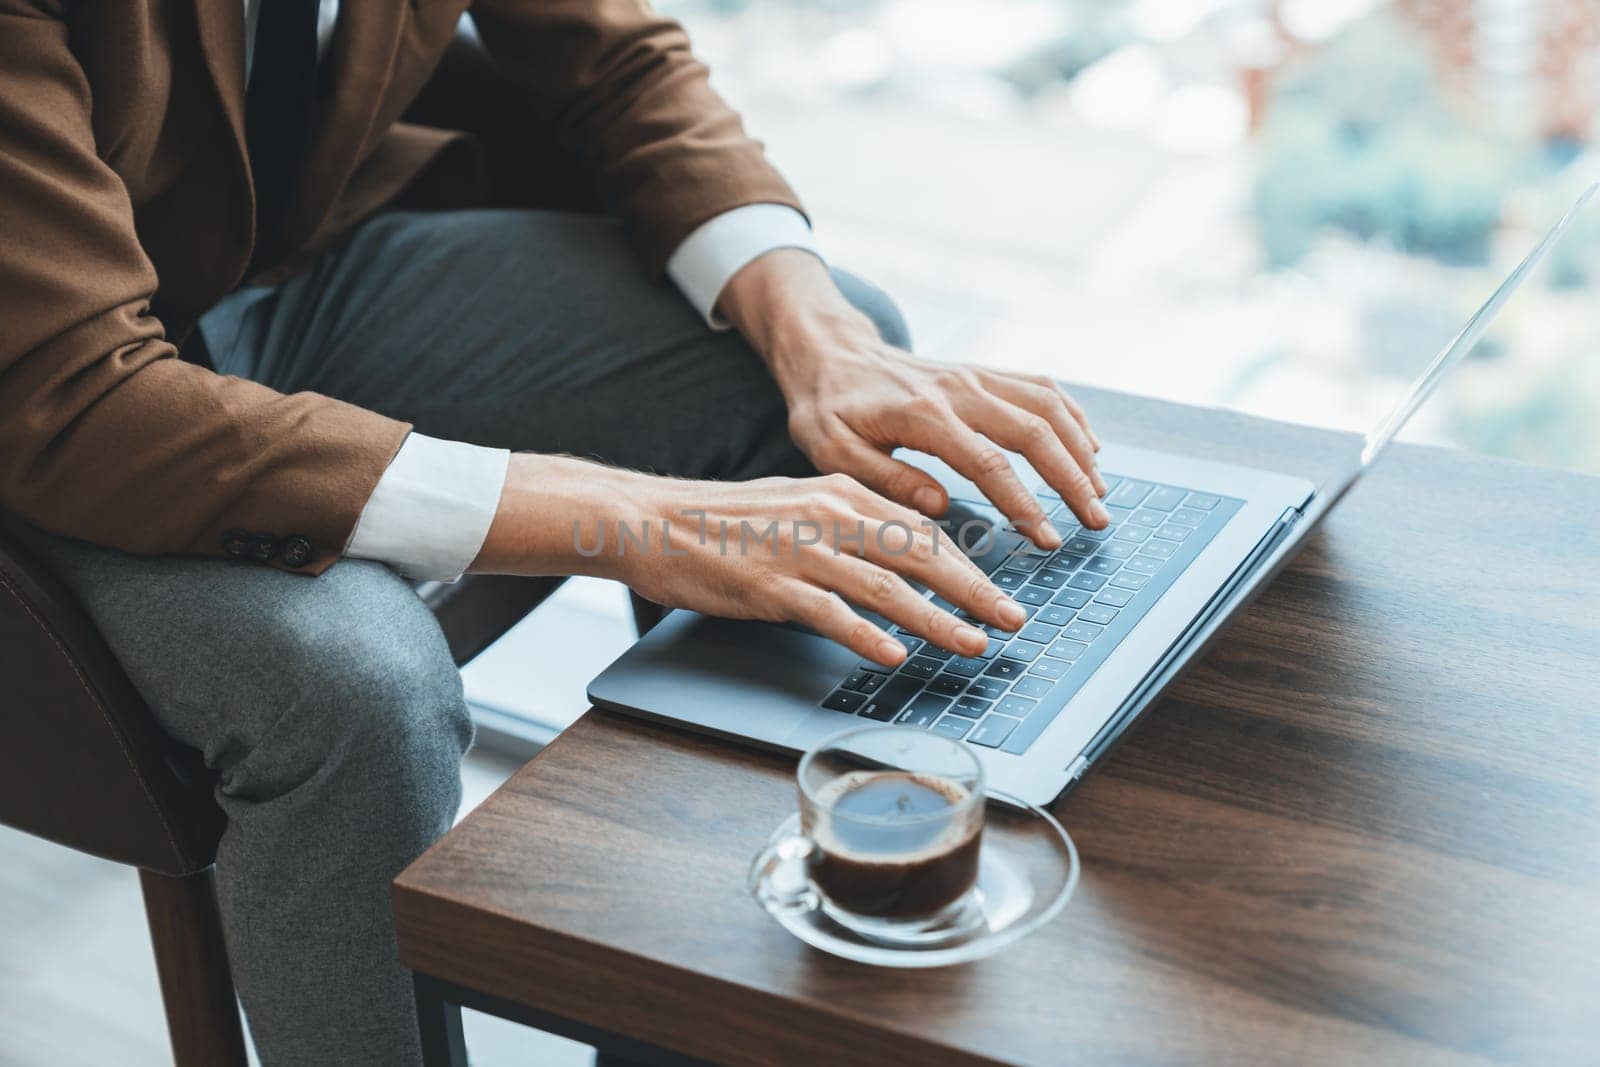 Top view of smart businessman hand searching, typing,analyzing data by using laptop. Closeup image of manager hands working with laptop on wooden desk with coffee cup surrounded by nature. Ornamented.